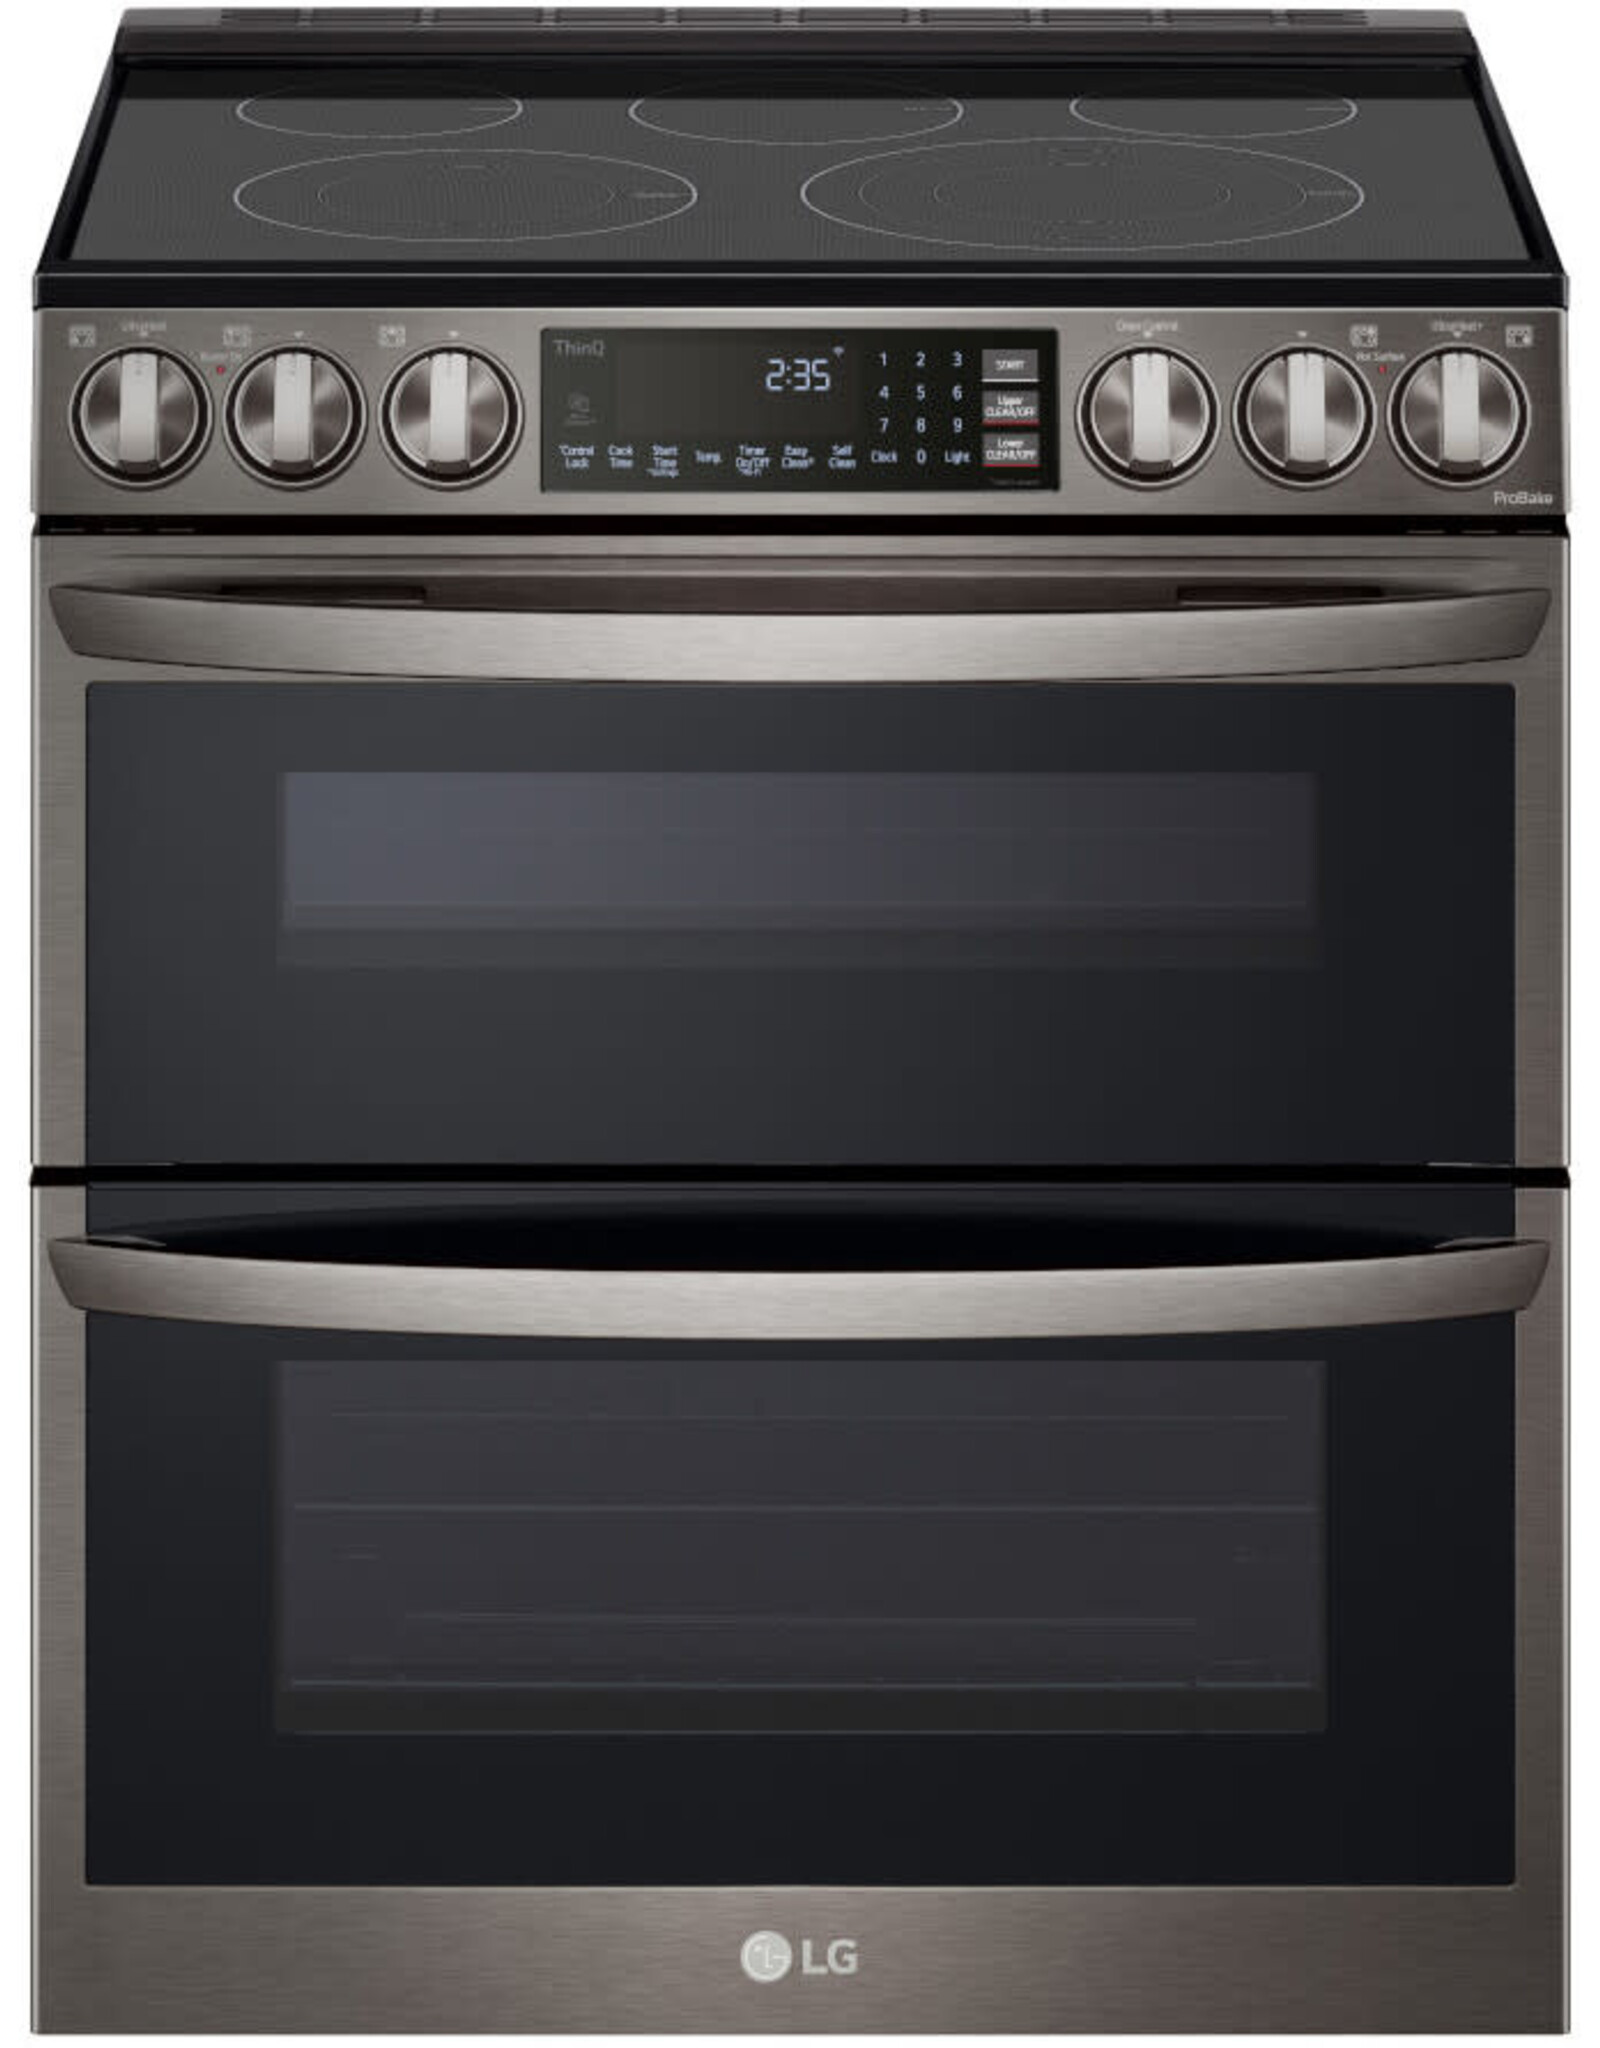 lg LTEL7337D LG 7.3 cu. ft. Smart Electric Double Oven Slide-in Range with InstaView®, ProBake® Convection, Air Fry, and Air Sous Vide